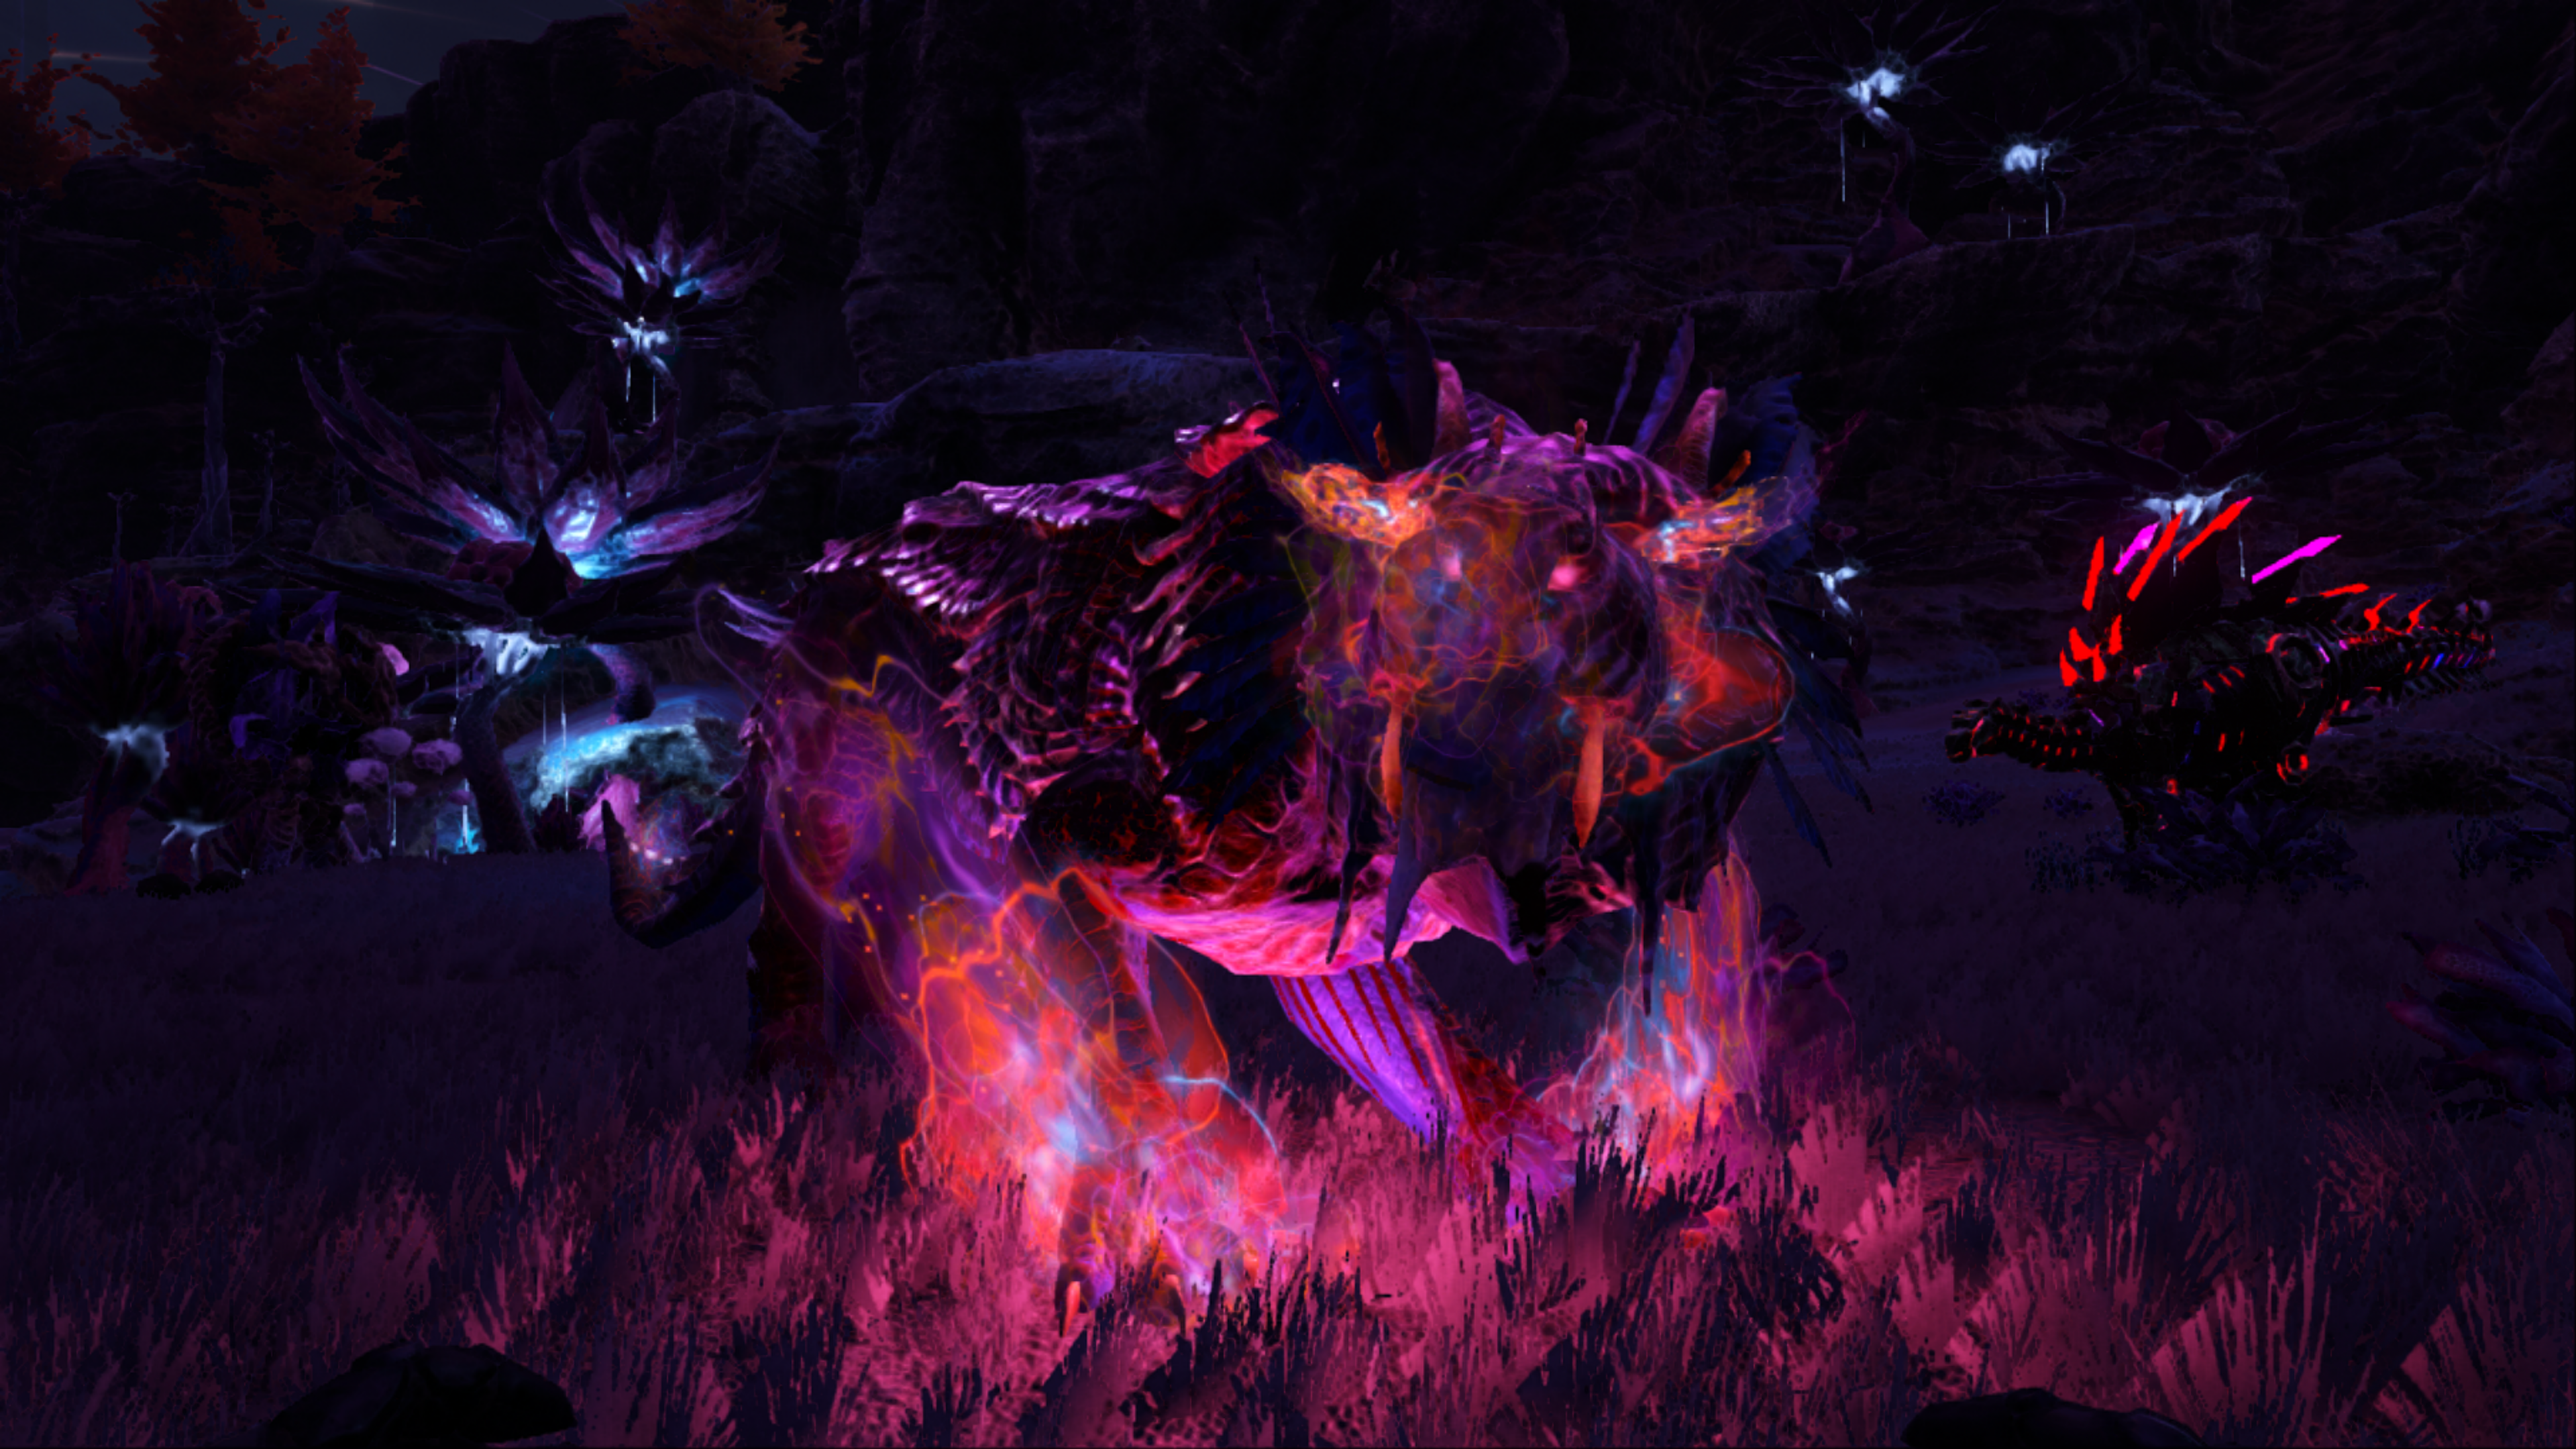 Alright the shadowmane is pretty cool